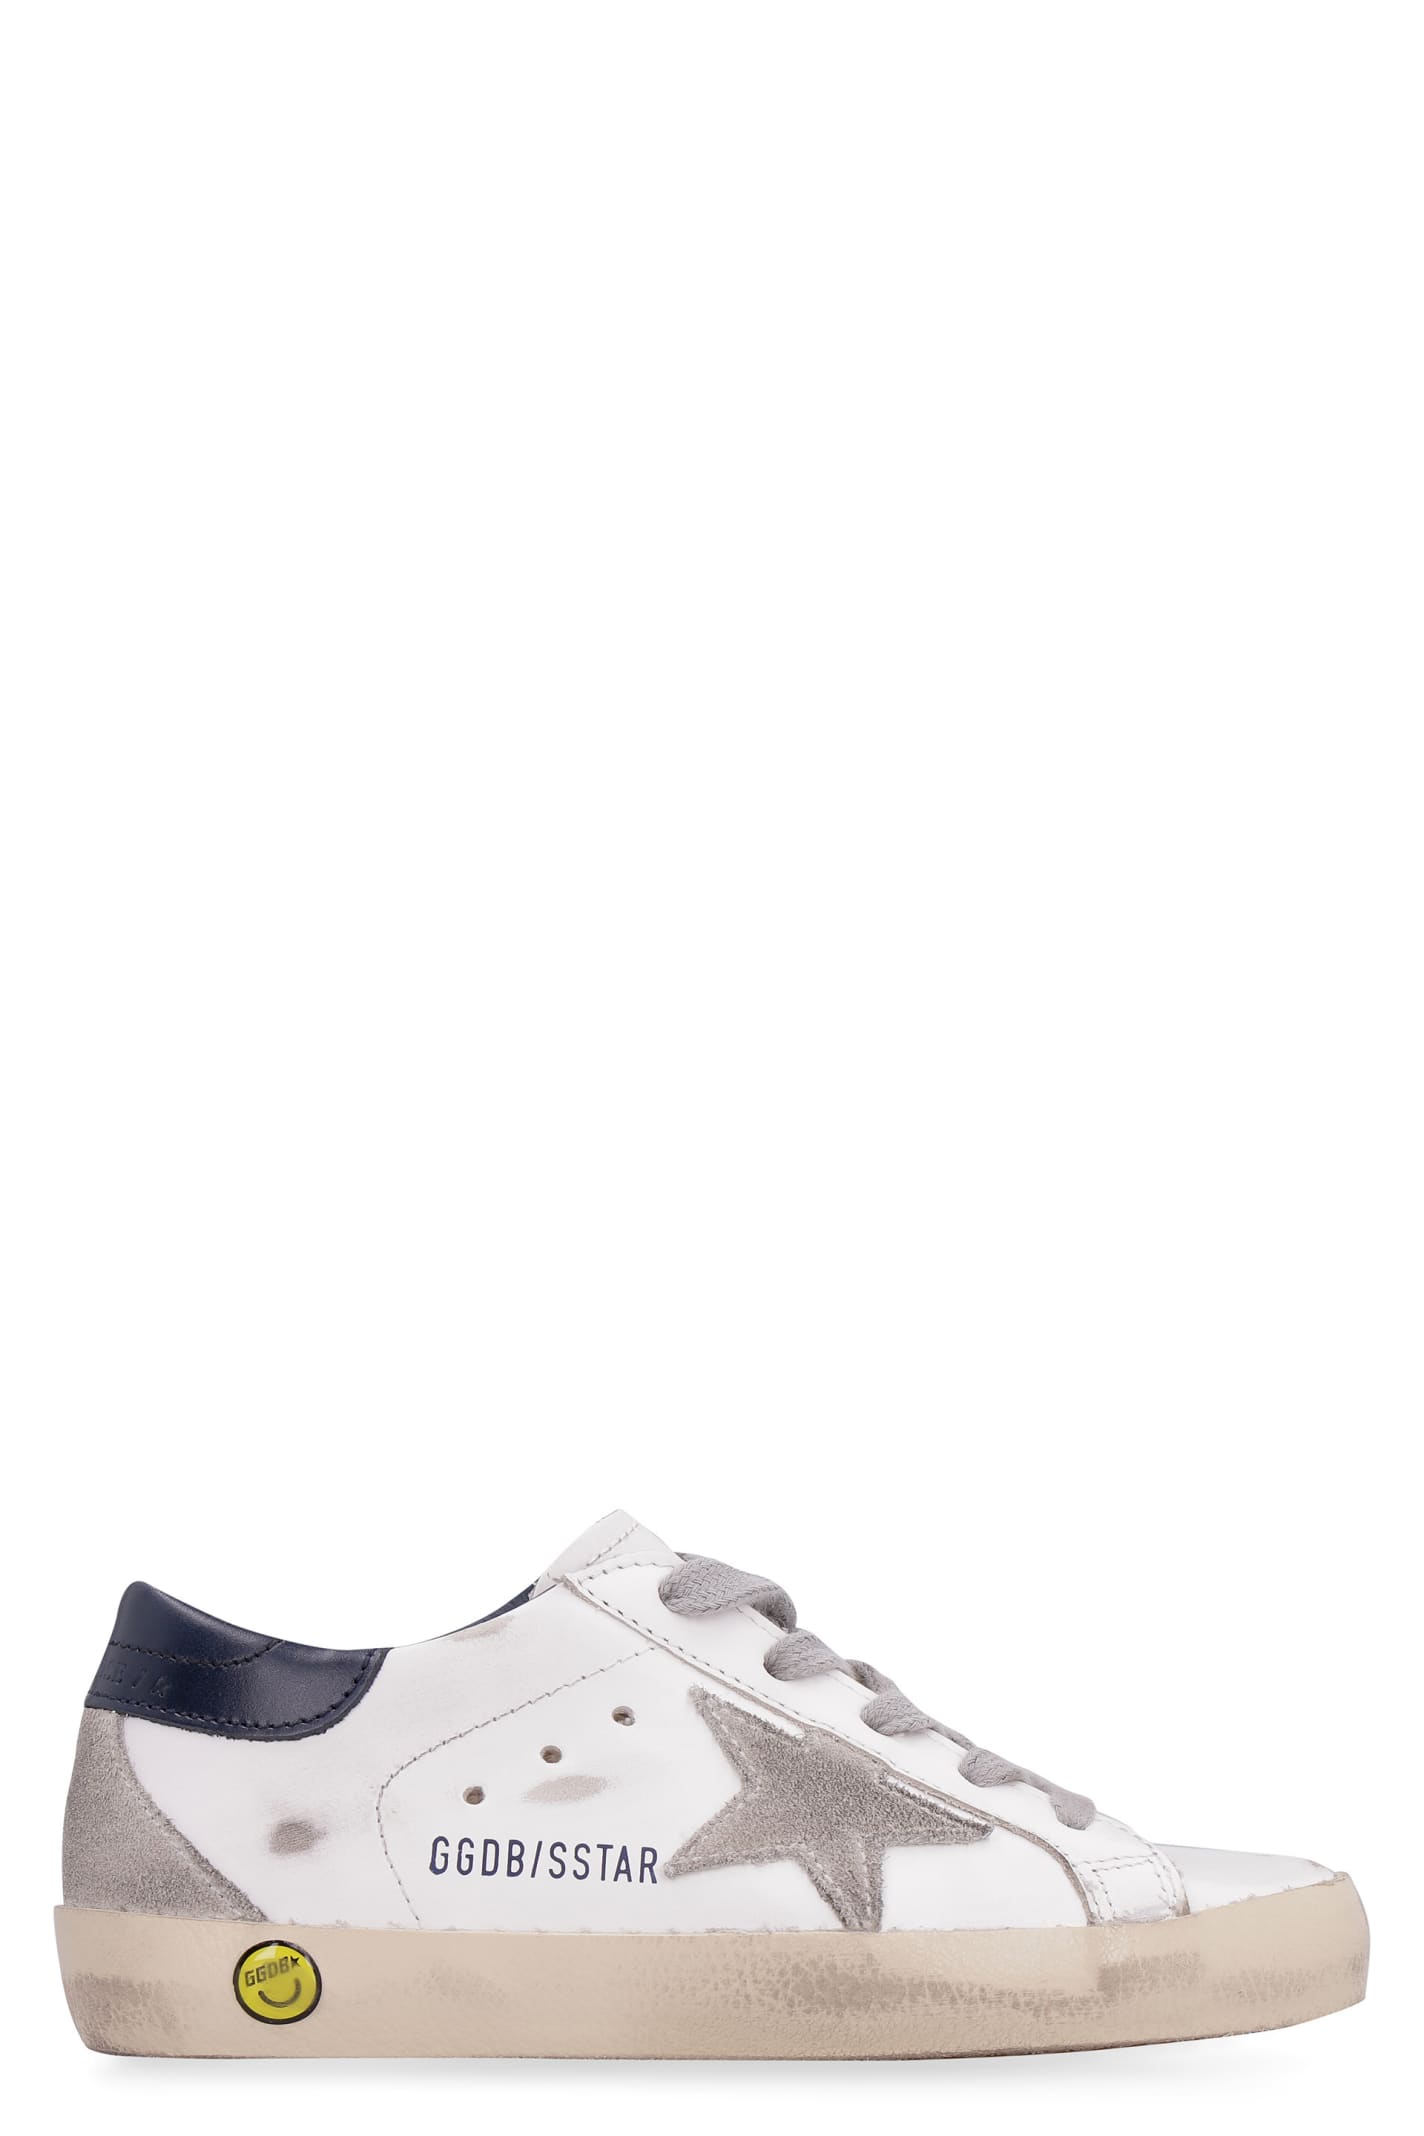 GOLDEN GOOSE SUPERSTAR LEATHER LOW-TOP SNEAKERS,GYF00102F000414 10303.B